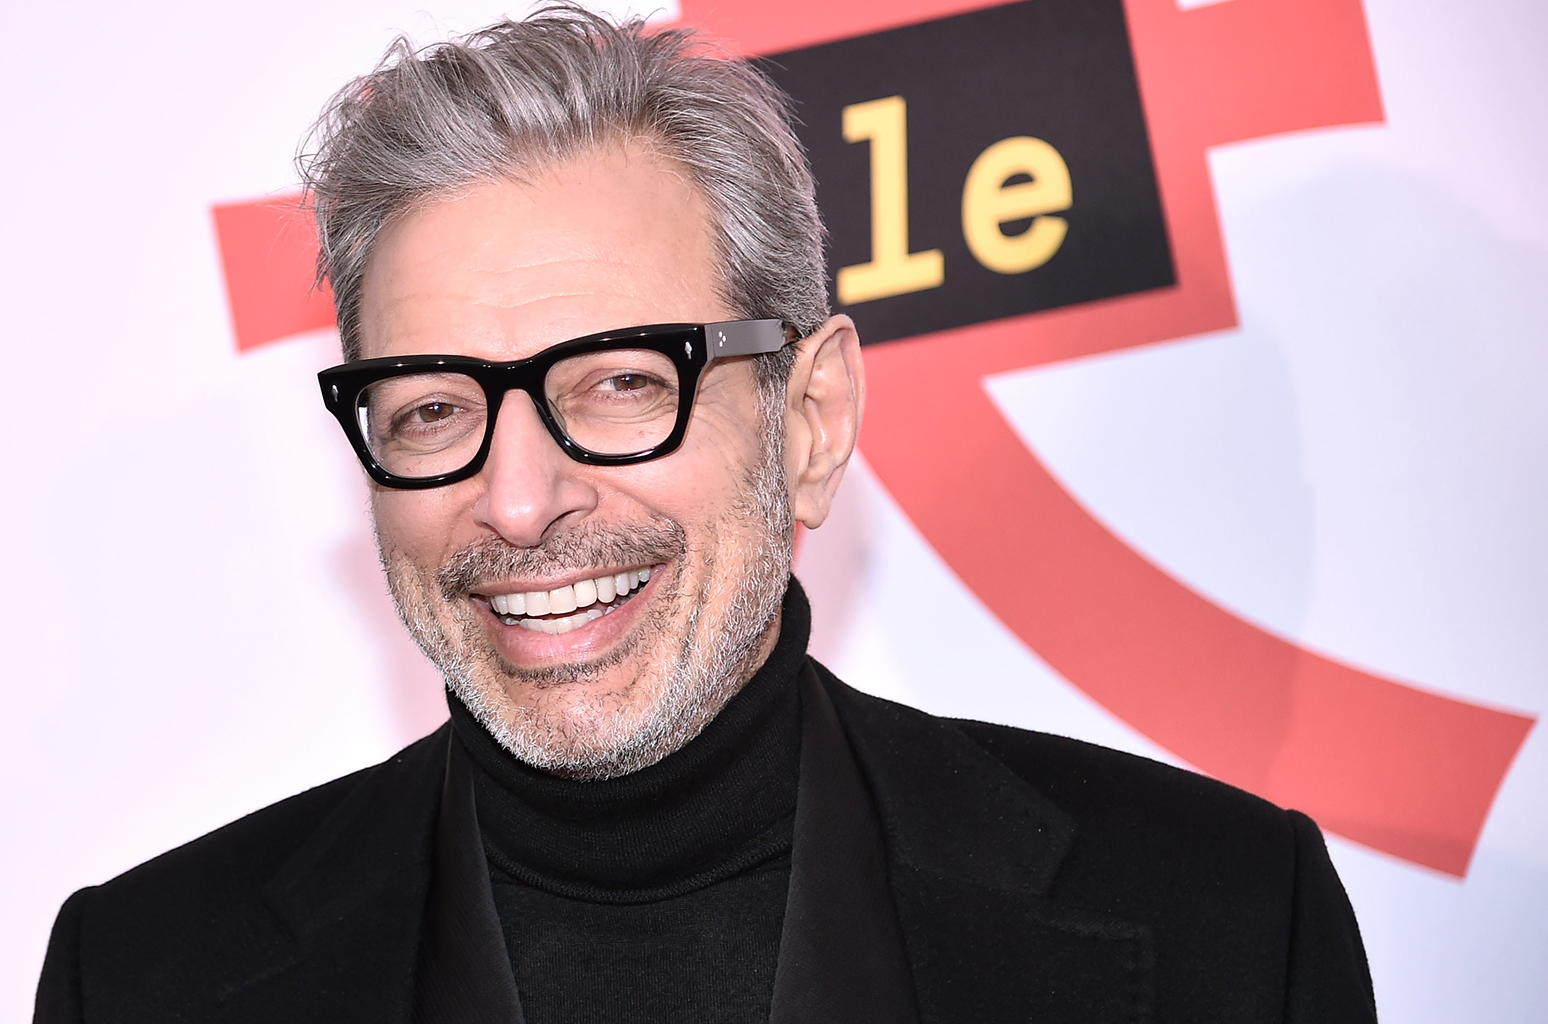 Actor and PartTime Musician Jeff Goldblum Signs Deal with Universal's